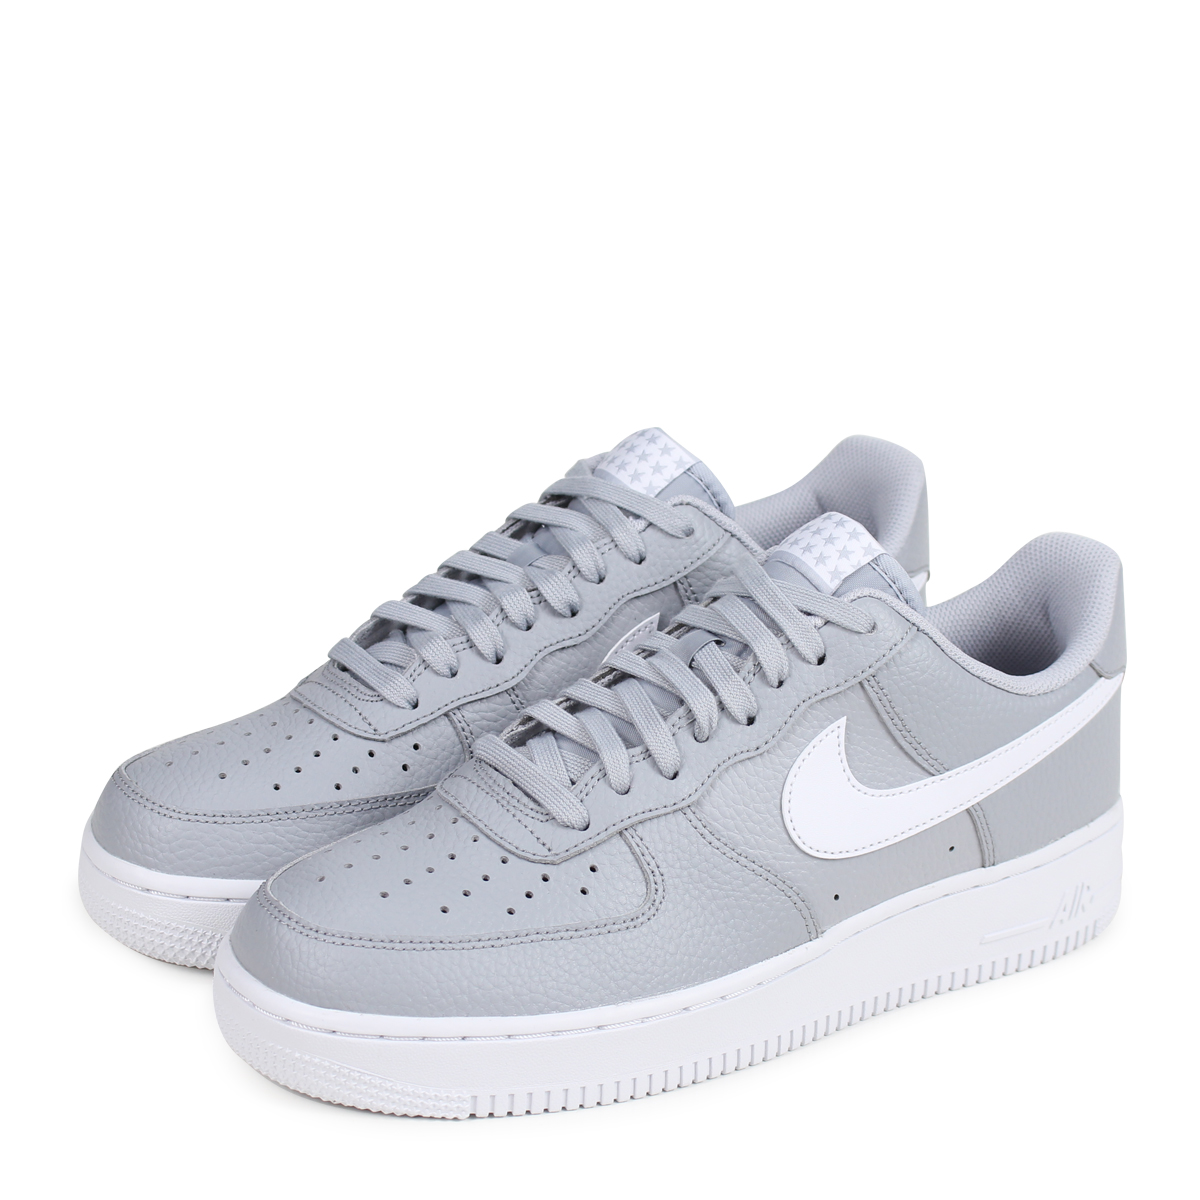 nike air force one gray cheap online